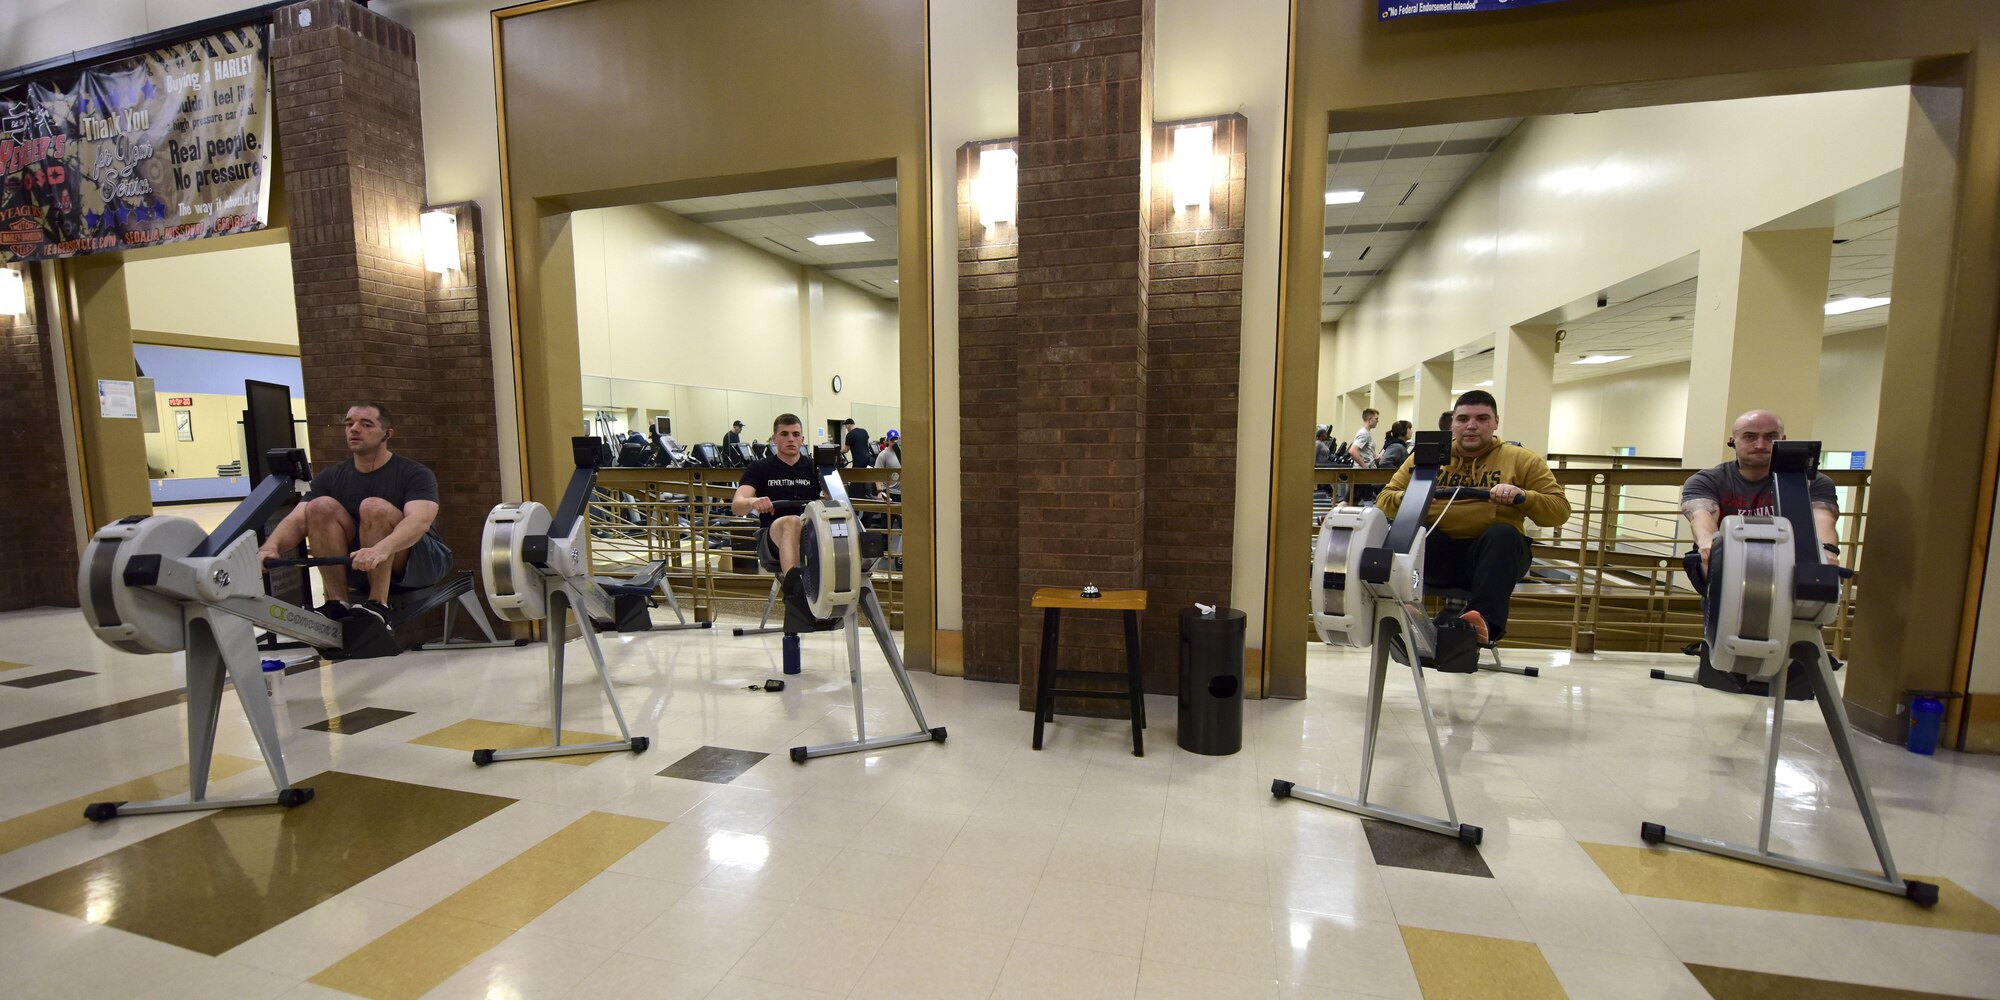 Participants of the first Base vs. Base Rowing Challenge begin rowing during the competition opening ceremony at Whiteman Air Force Base, Mo., Feb. 1, 2018. Before getting on one of the designated air rowers, participants check in with the fitness center front desk to ensure their meters are tracked.